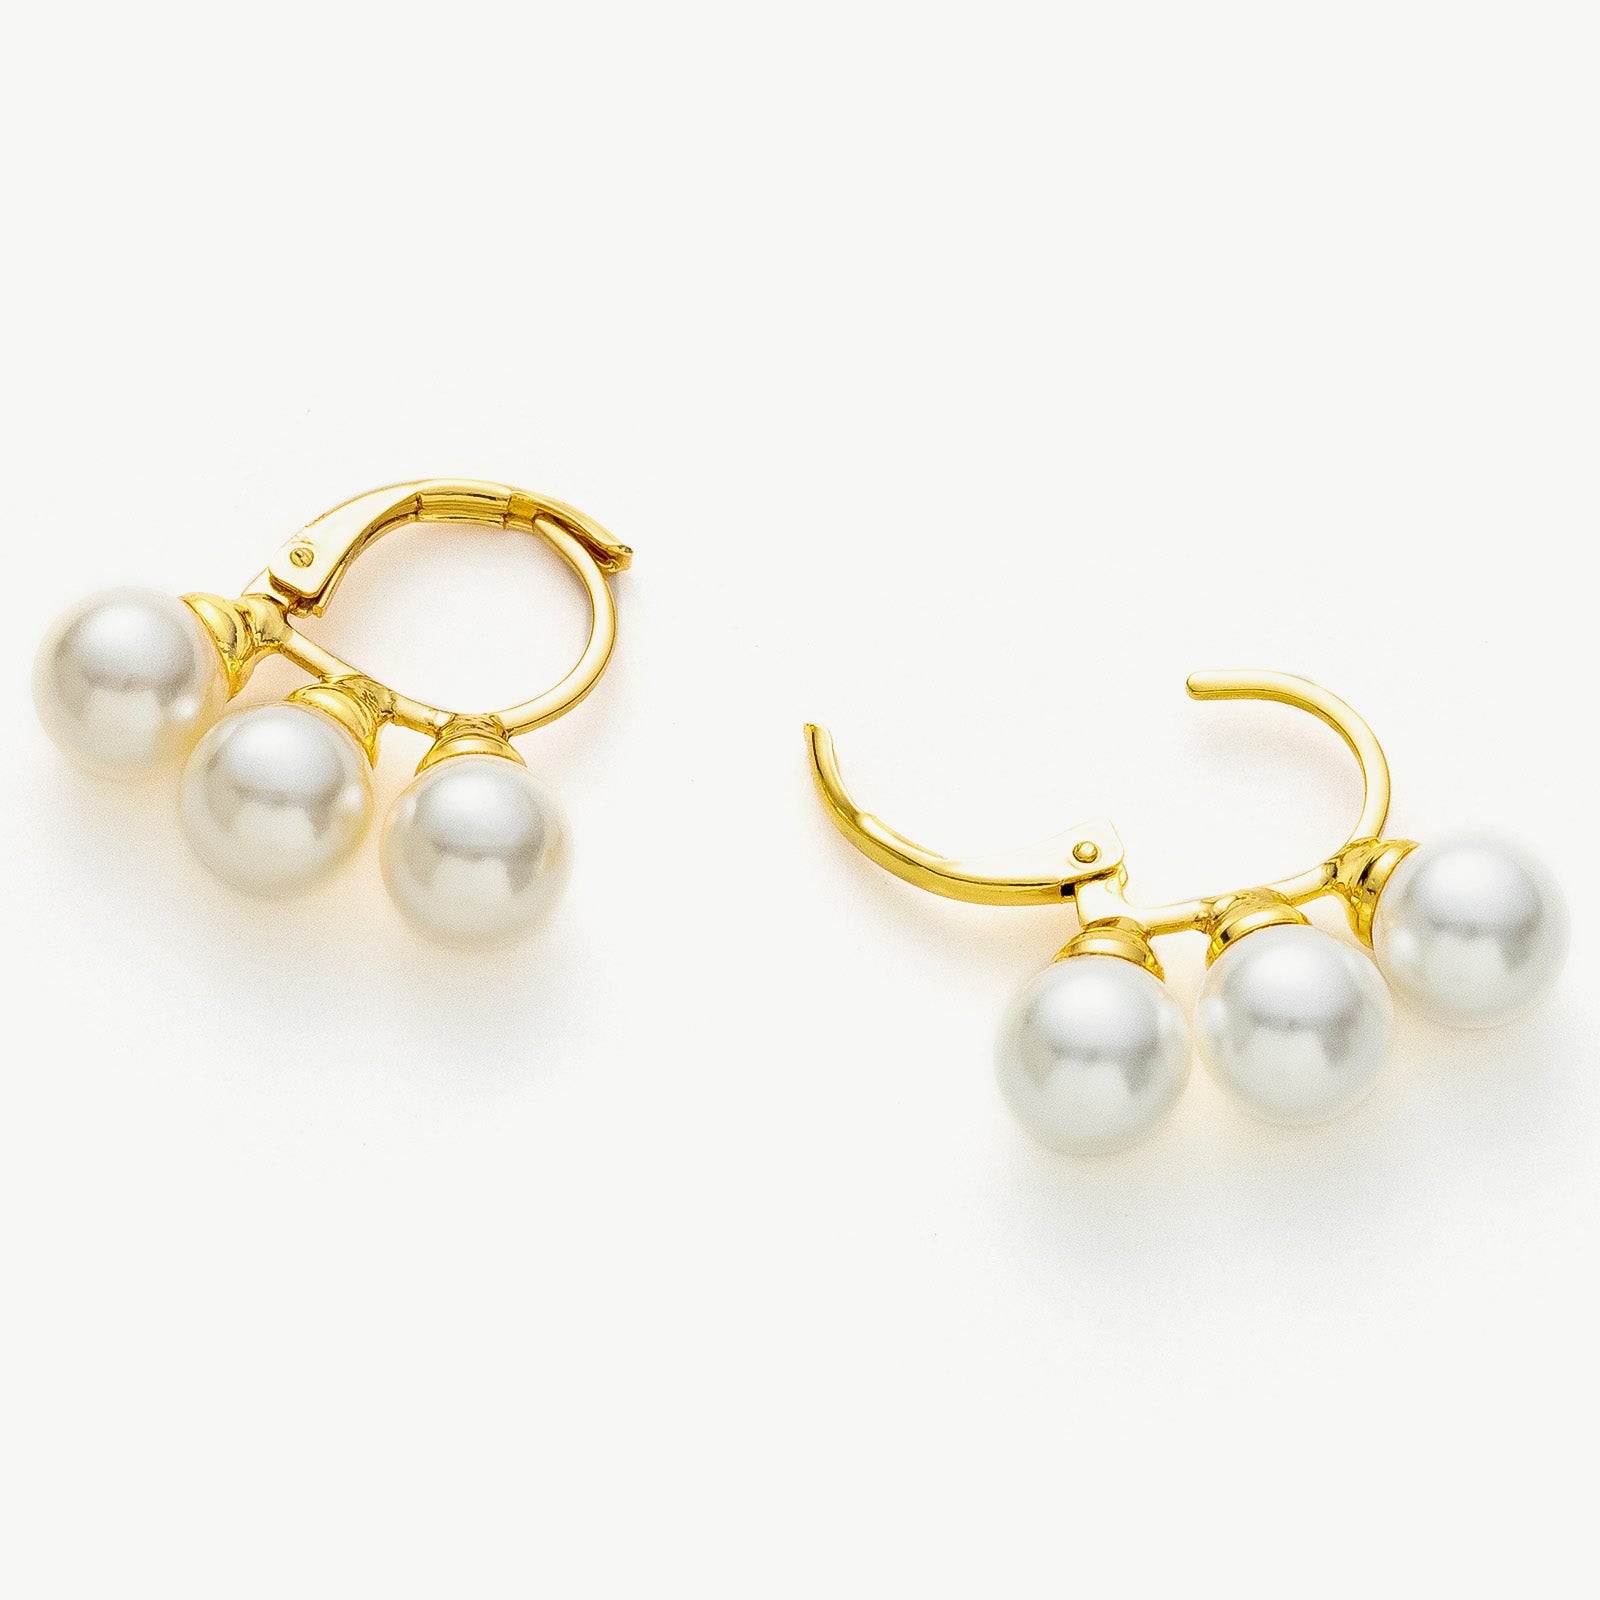 Pearl Huggie Earrings in Gold, offering chic and stylish adornments that effortlessly elevate your ear ensemble with pearls and golden charm